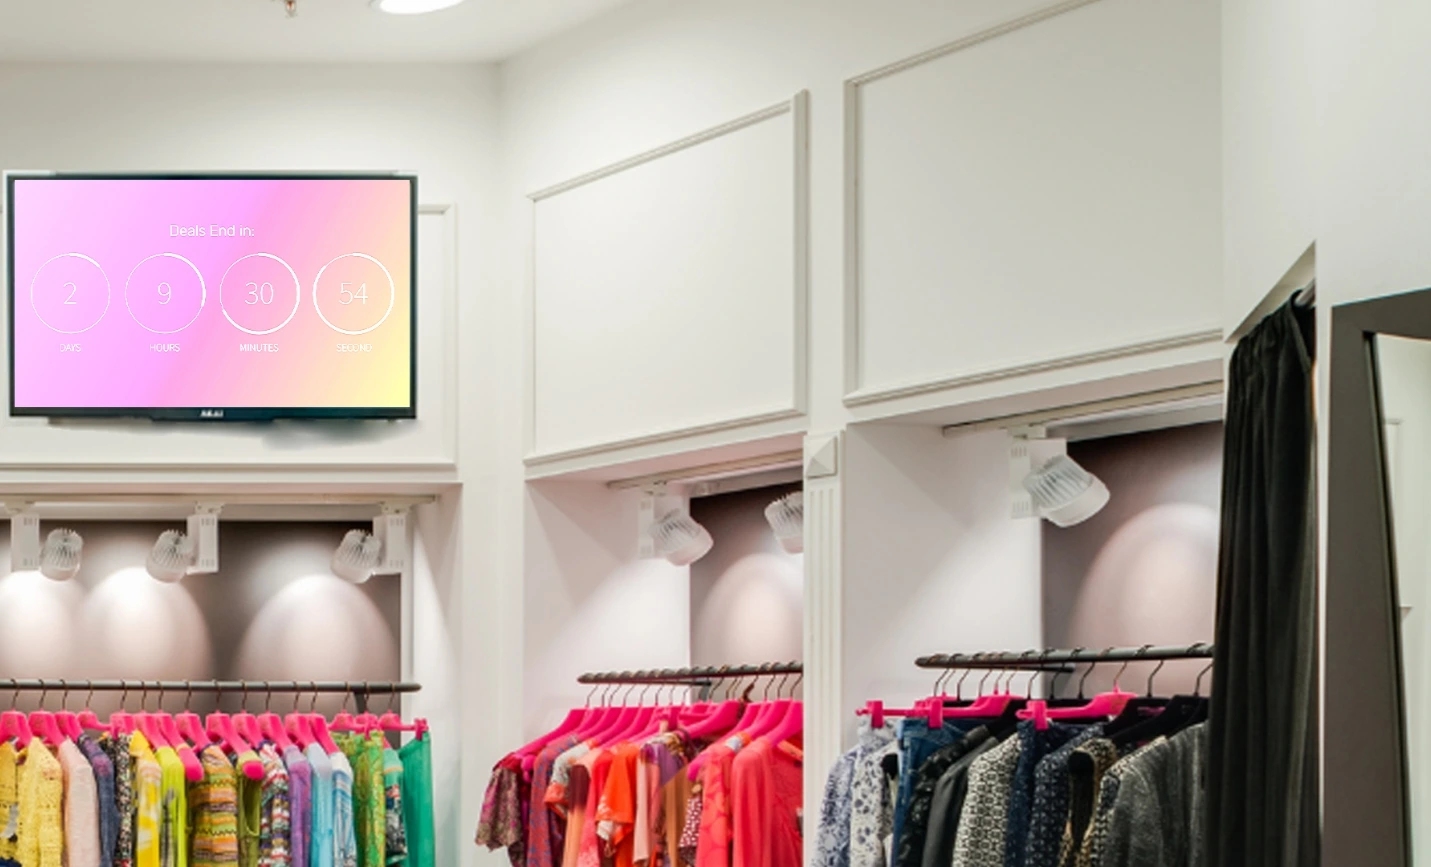 Digital signage screen placed in clothing store showing Countdown Timer of an event using Pickcel digital sigange software